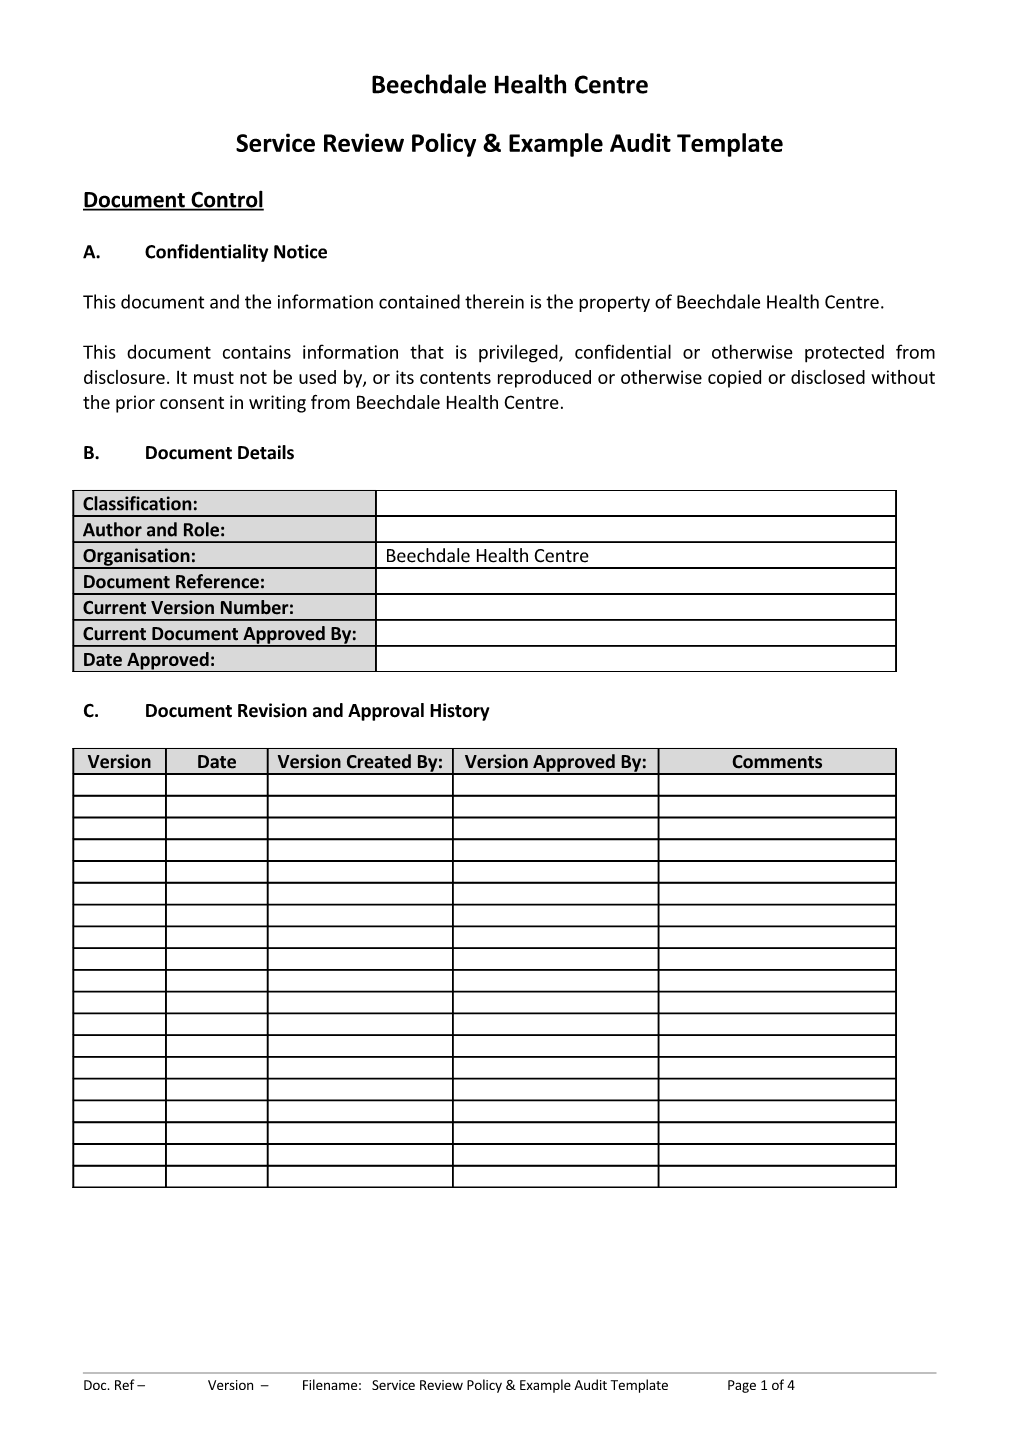 Service Review Policy & Example Audit Template